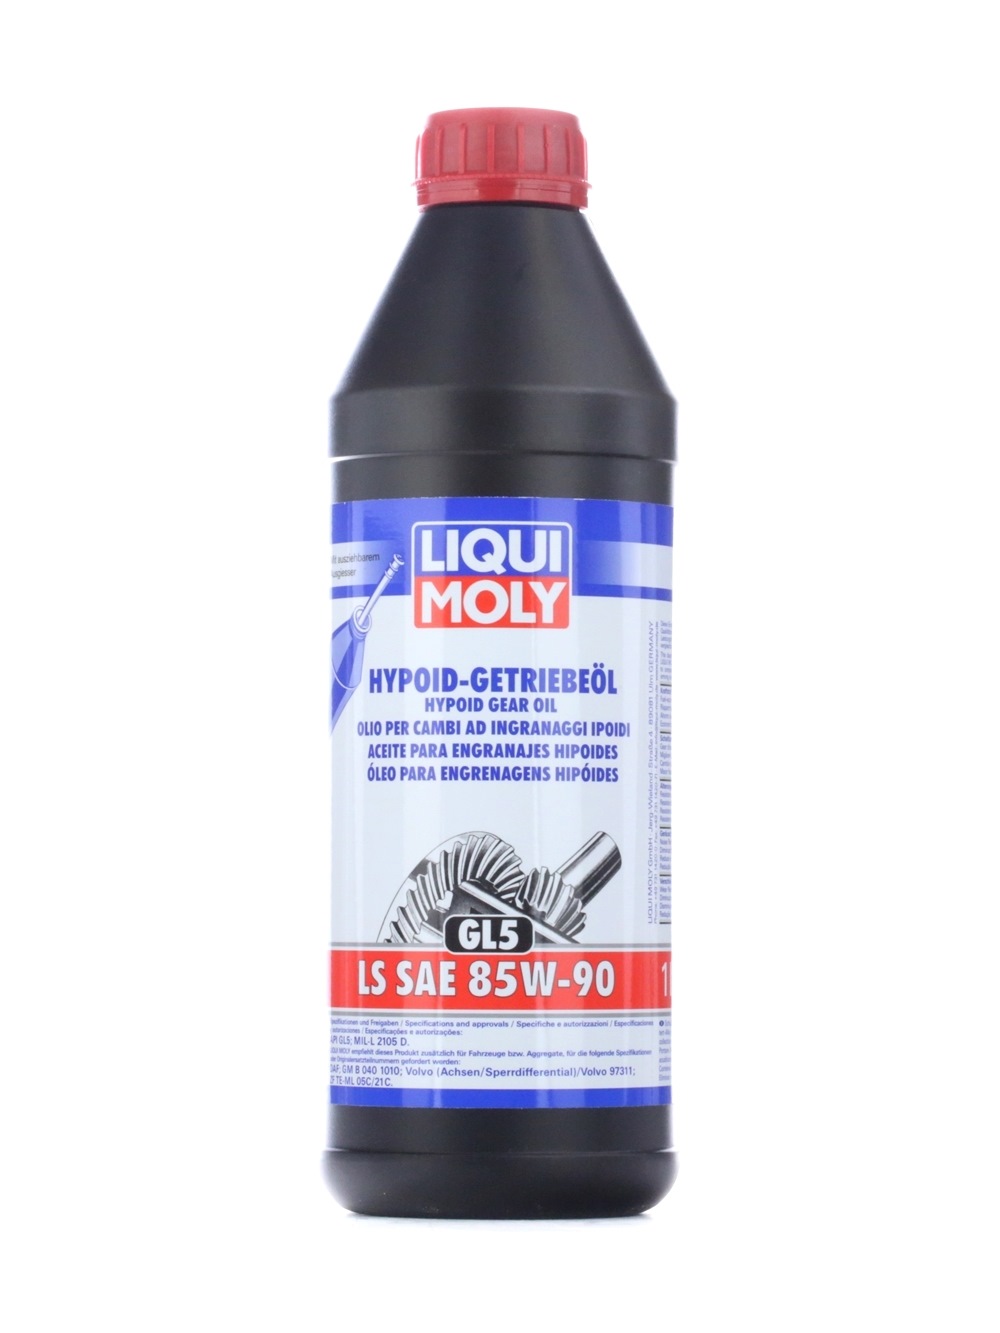 Axle Gear Oil LIQUI MOLY 1410 - Propshafts and differentials spare parts order